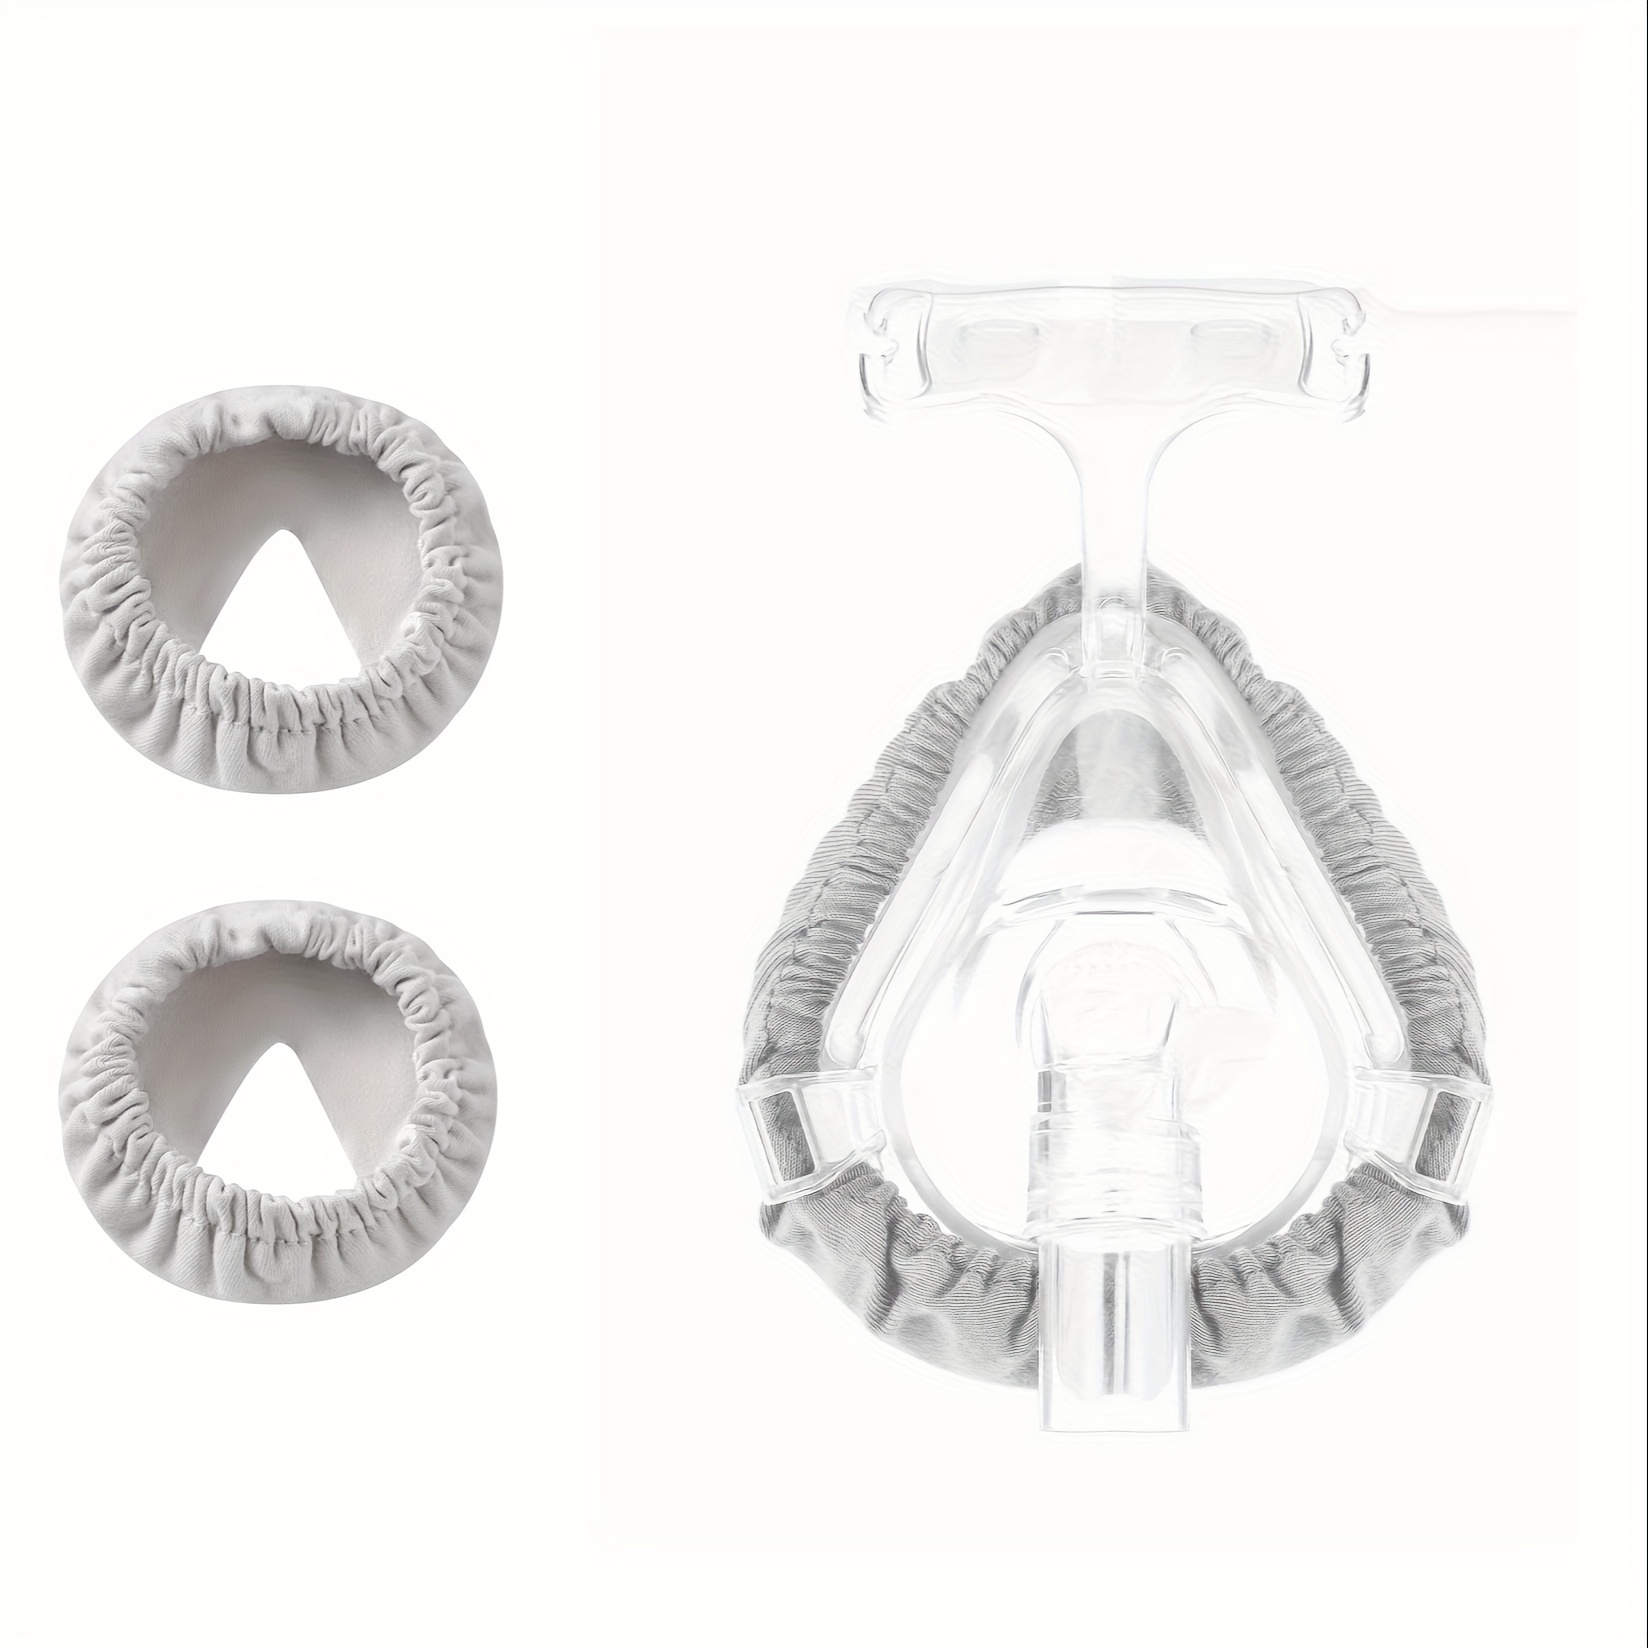 

2 Packs Cpap Mask Liners 1 Size Fits Most Soft Cotton Fabric Minimizes Noisy Air Leaks Reduces Skin Irritation Reusable &amp Washable